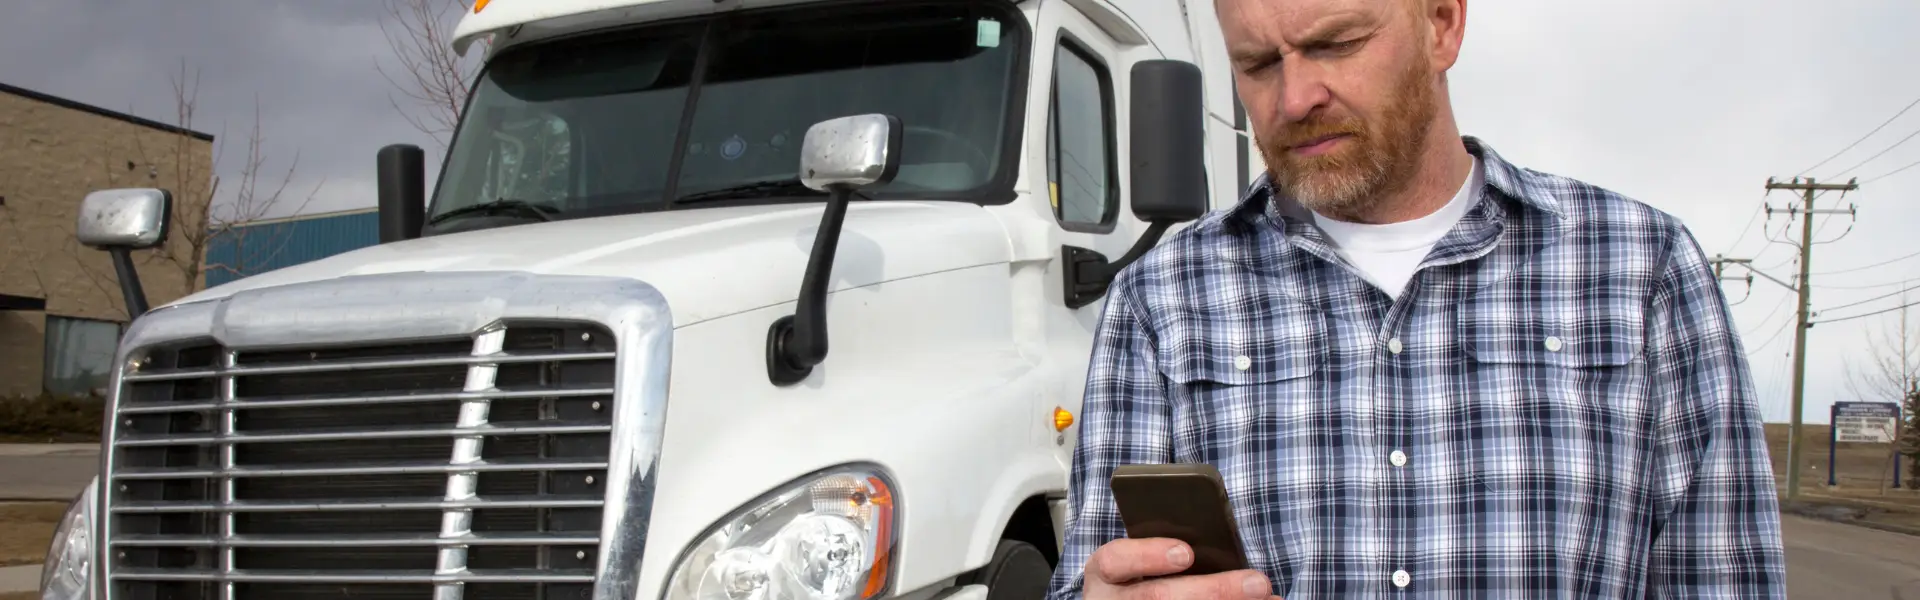 Man looking at phone with semi truck in background